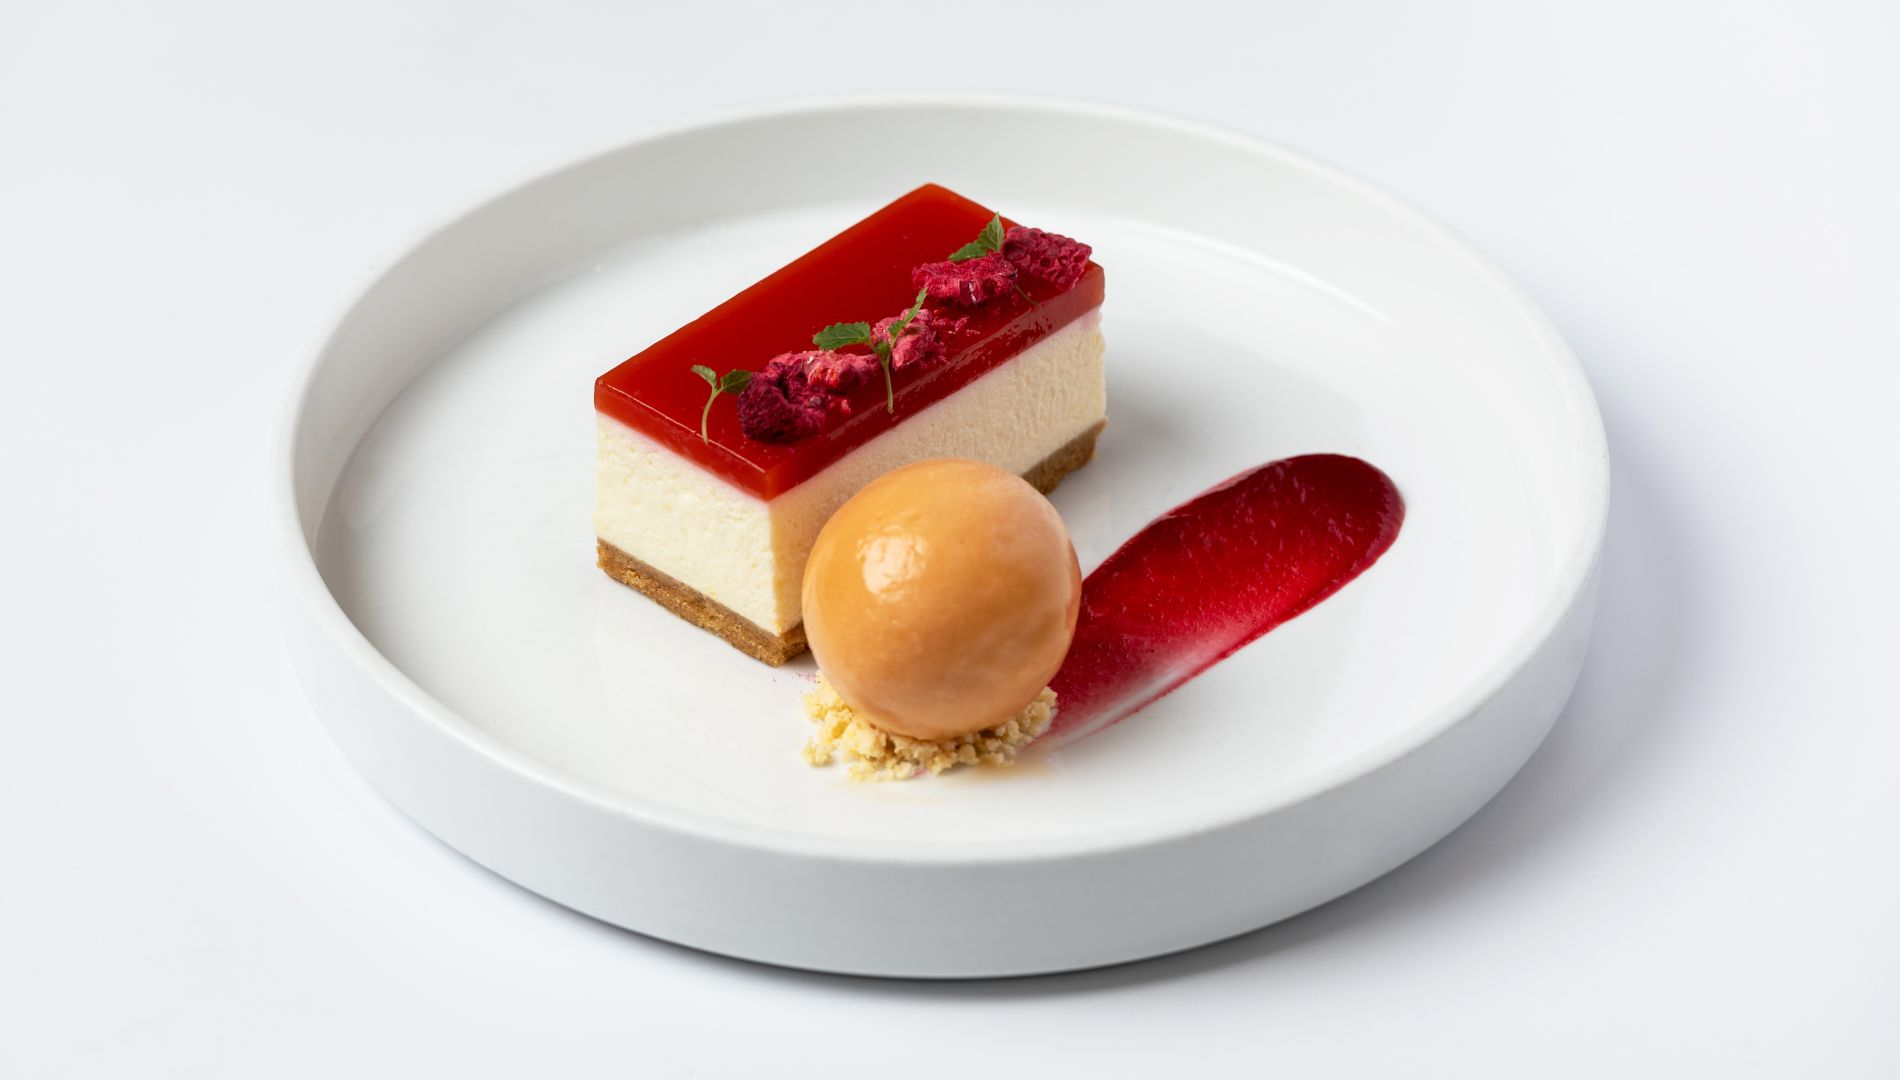 A Plate With A Dessert On It